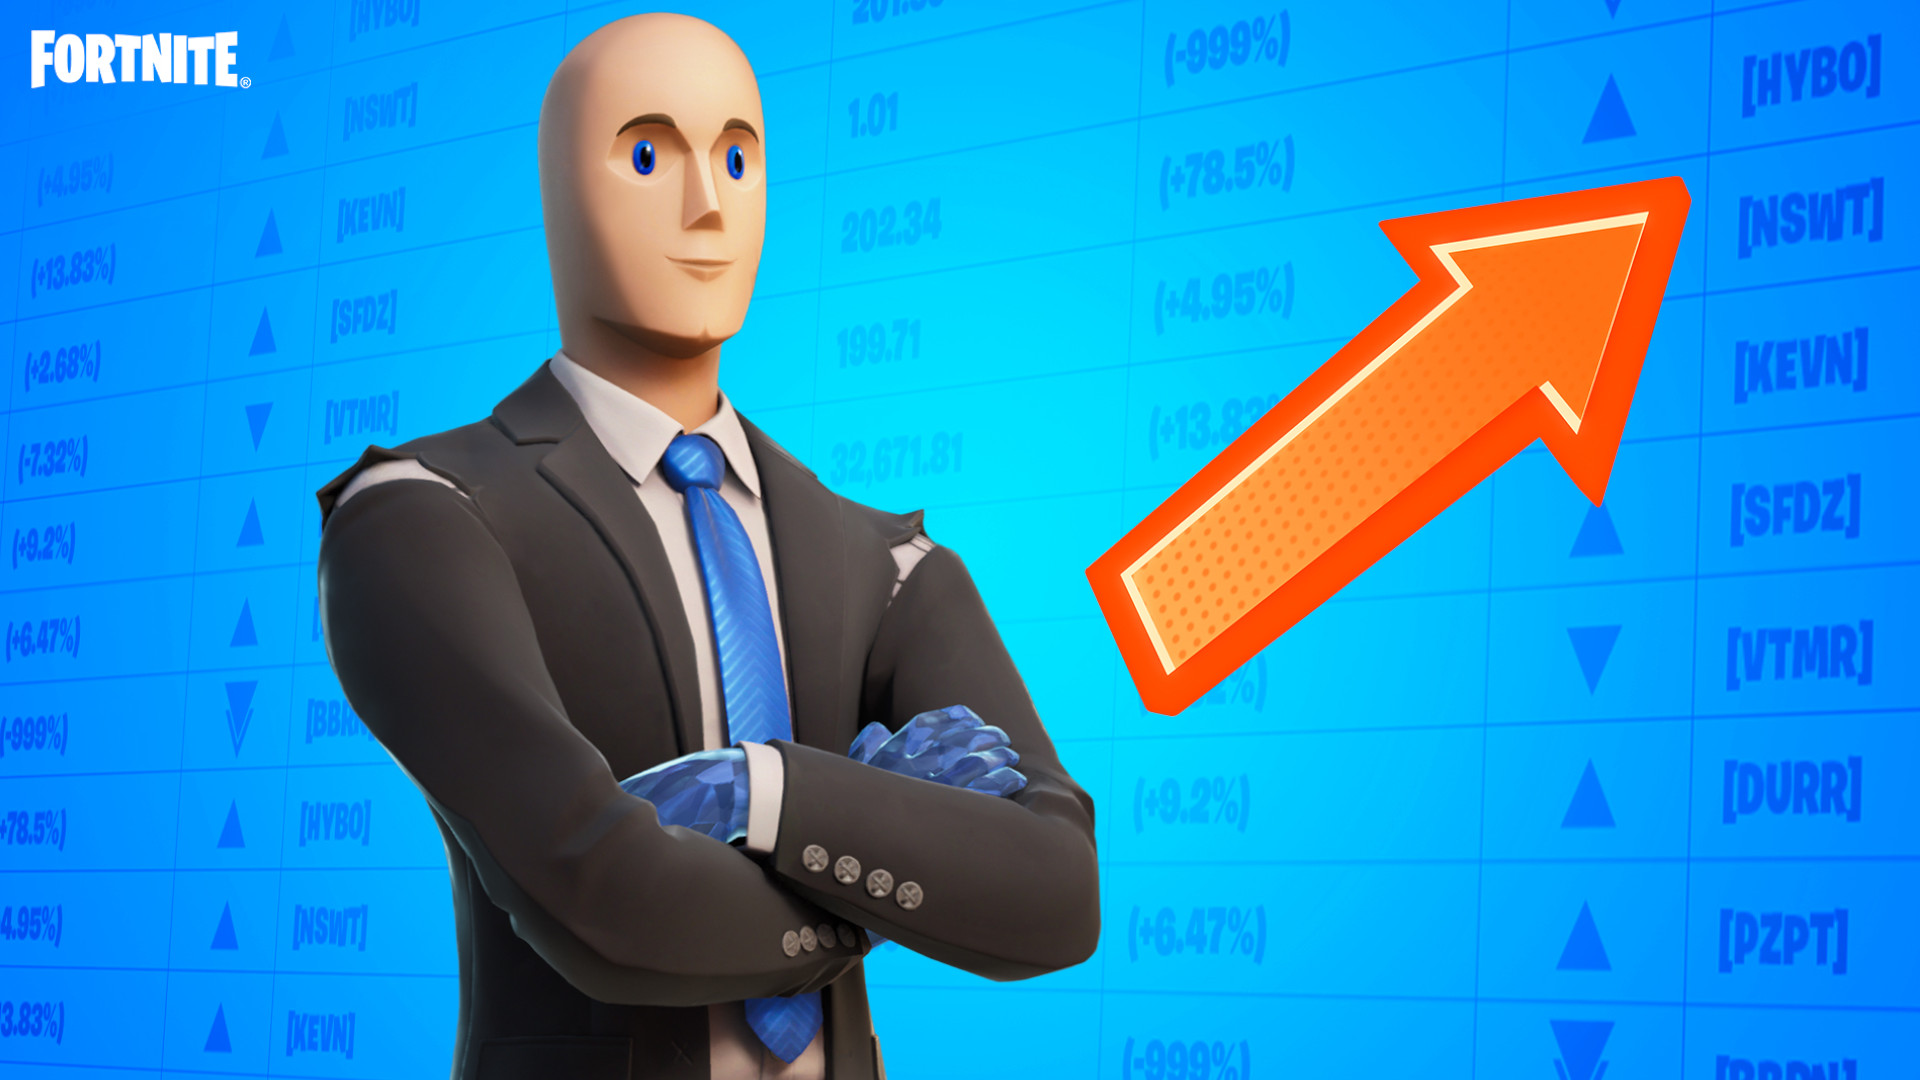 Fortnite player reaches level 1,000 for the first time